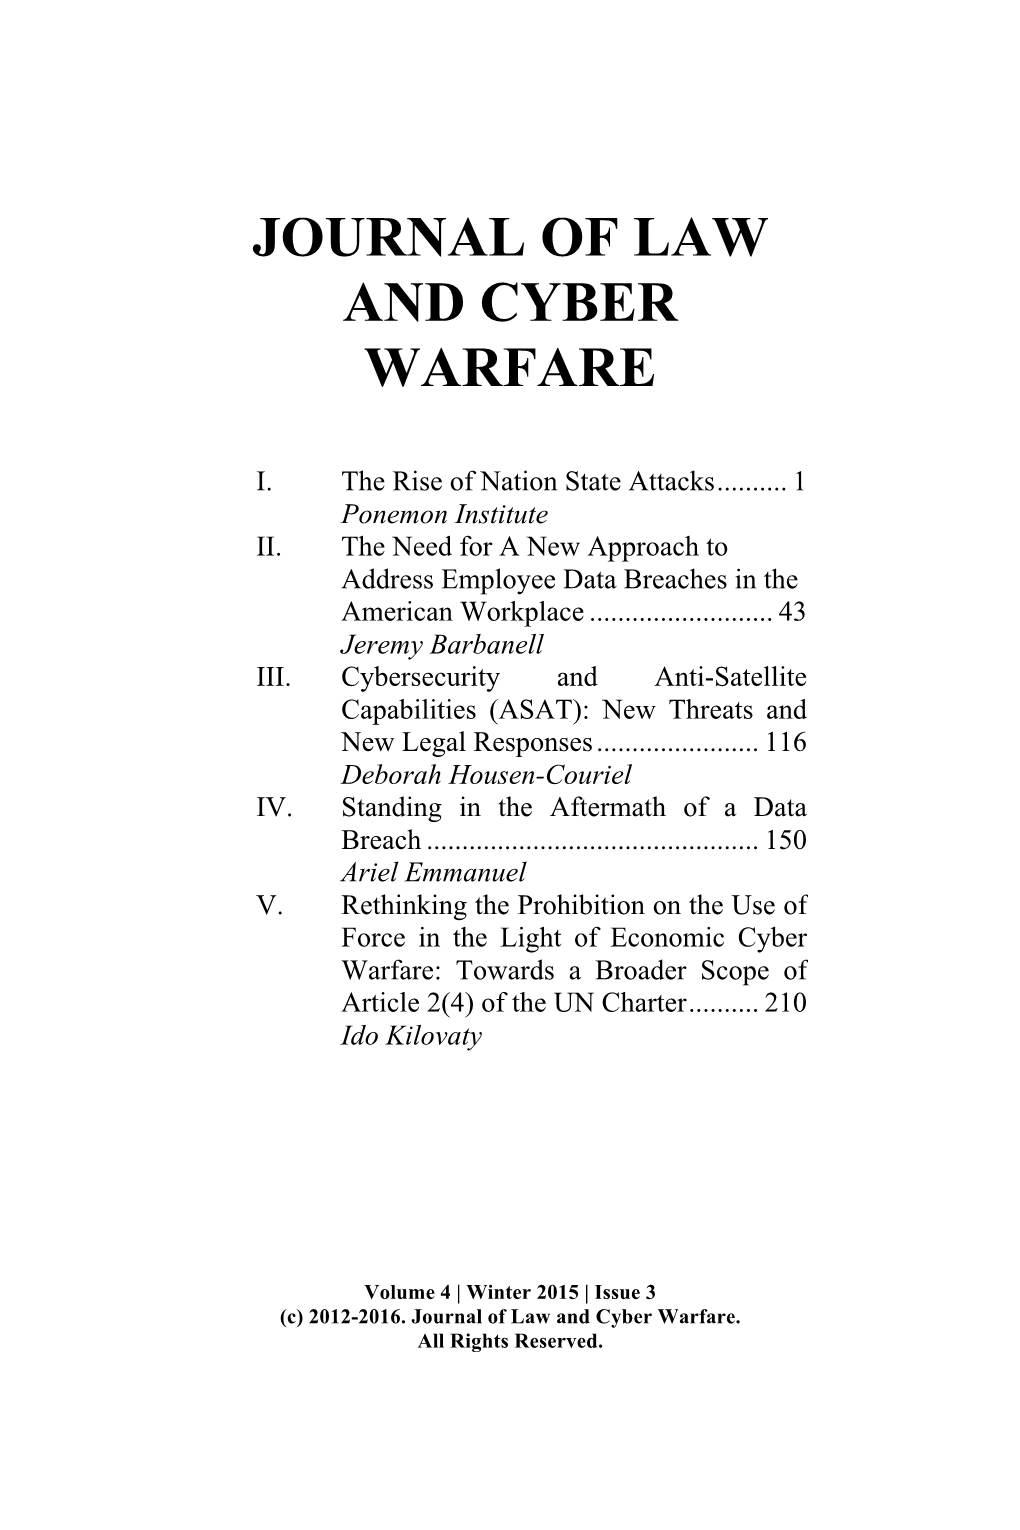 Cybersecurity and Anti-Satellite Capabilities (ASAT): New Threats and New Legal Responses